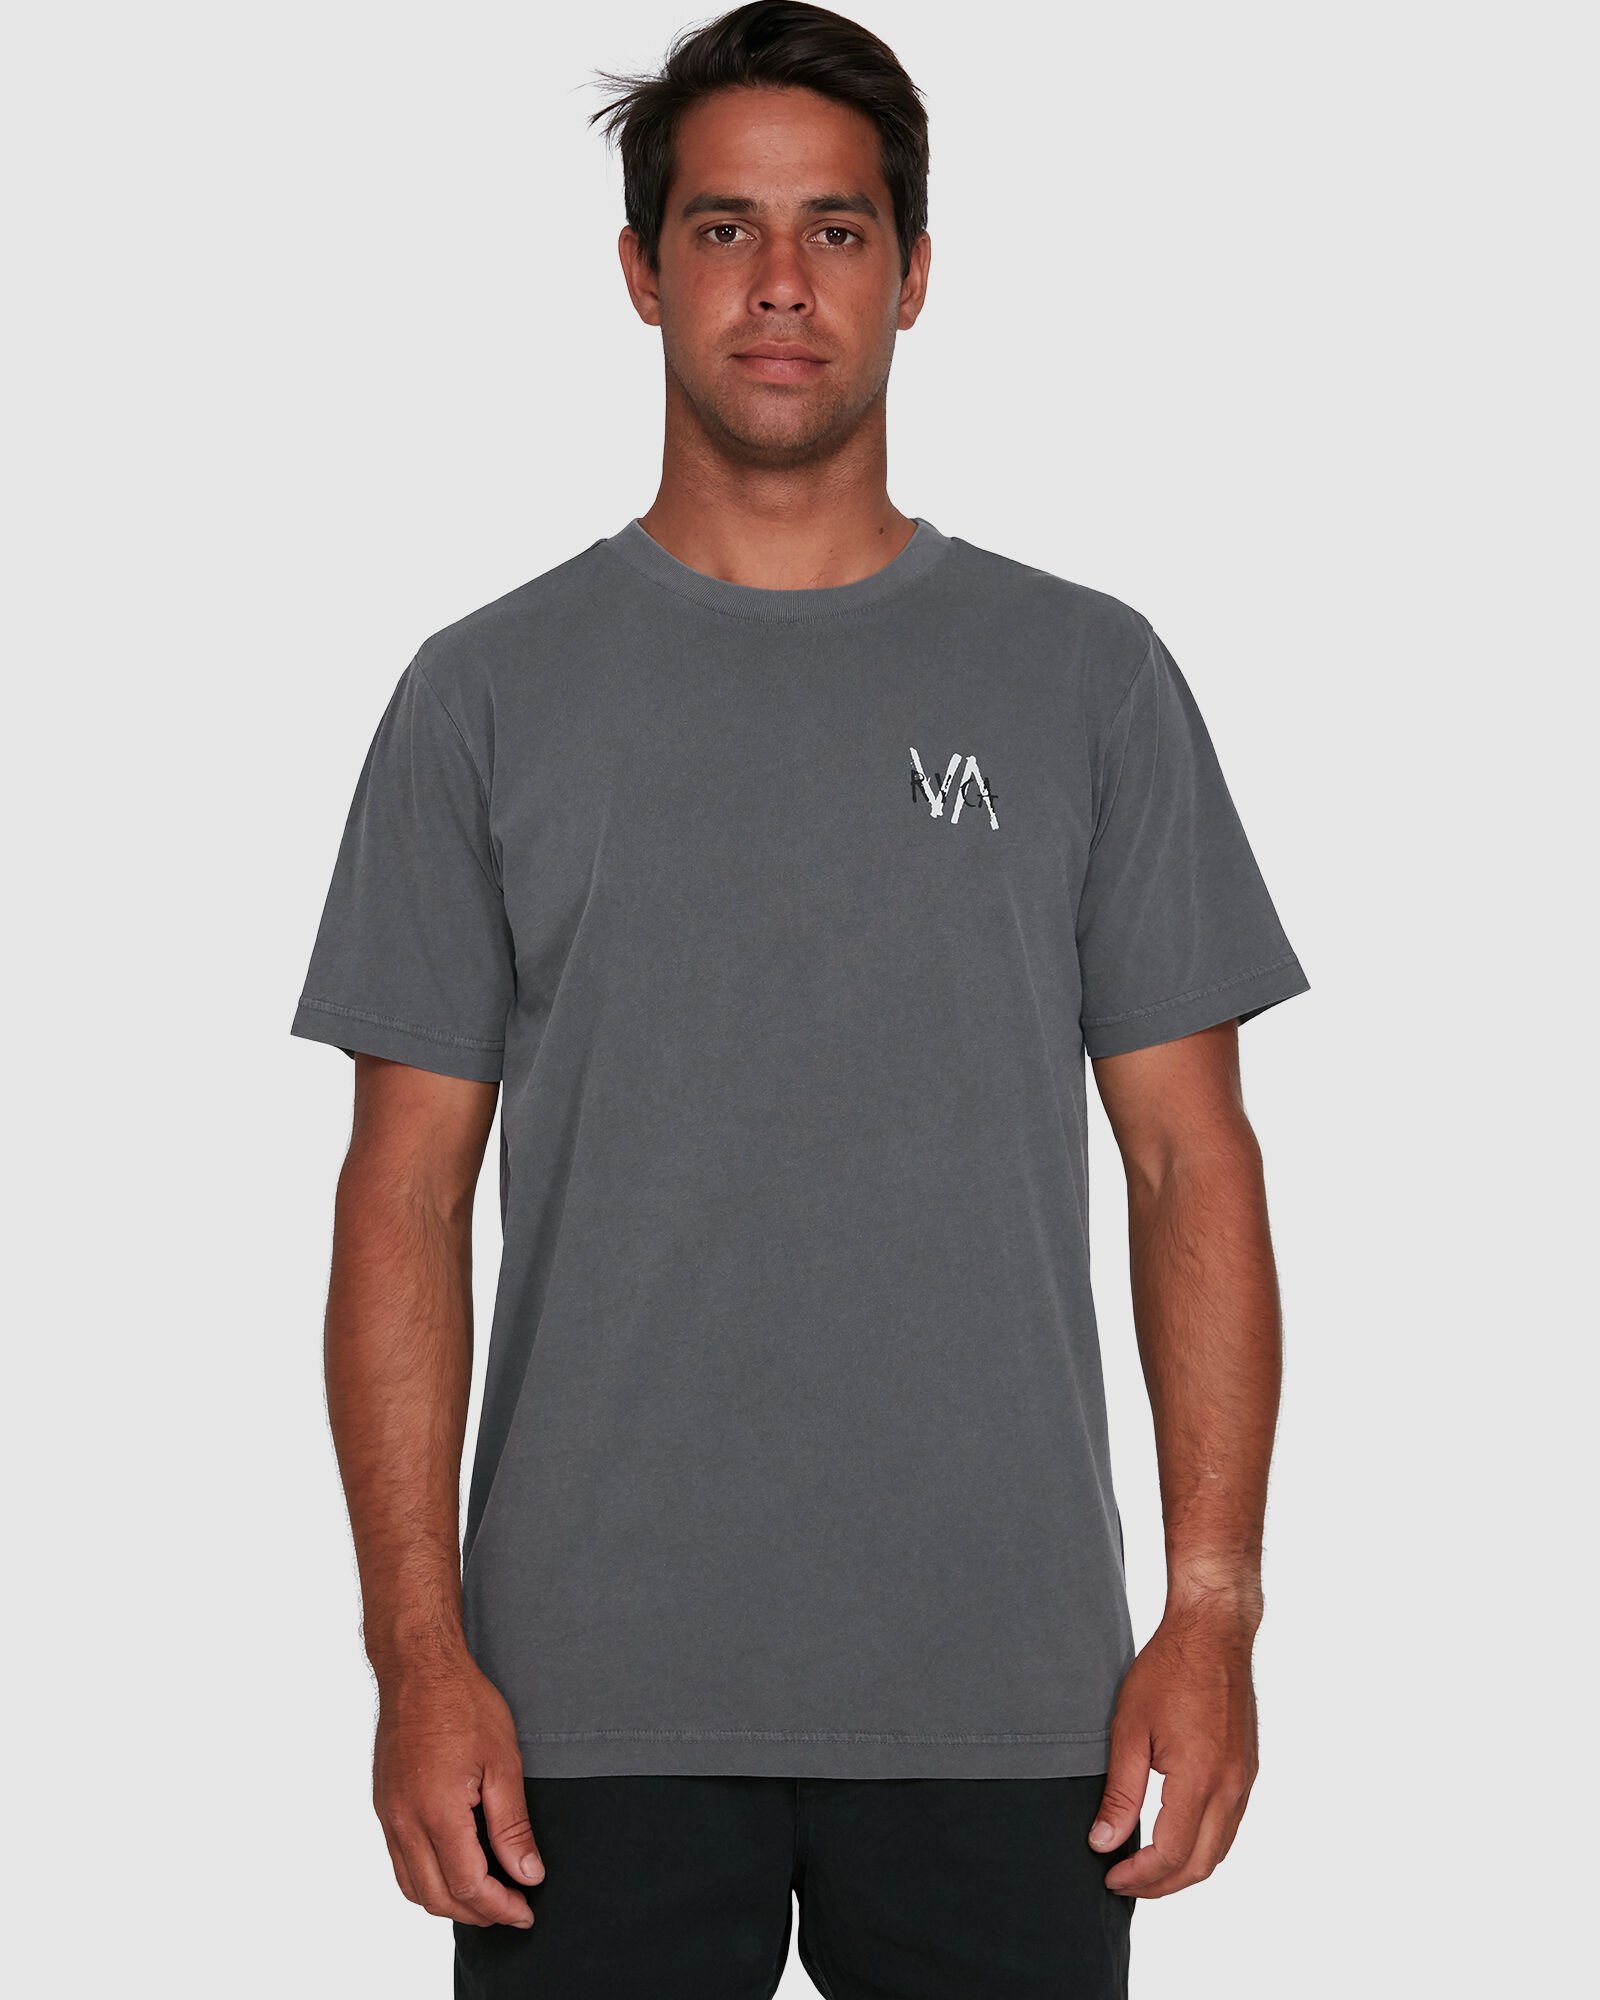 RVCA - VA Sands Tee - Mens-Tops : We stock the very latest in Surf ...